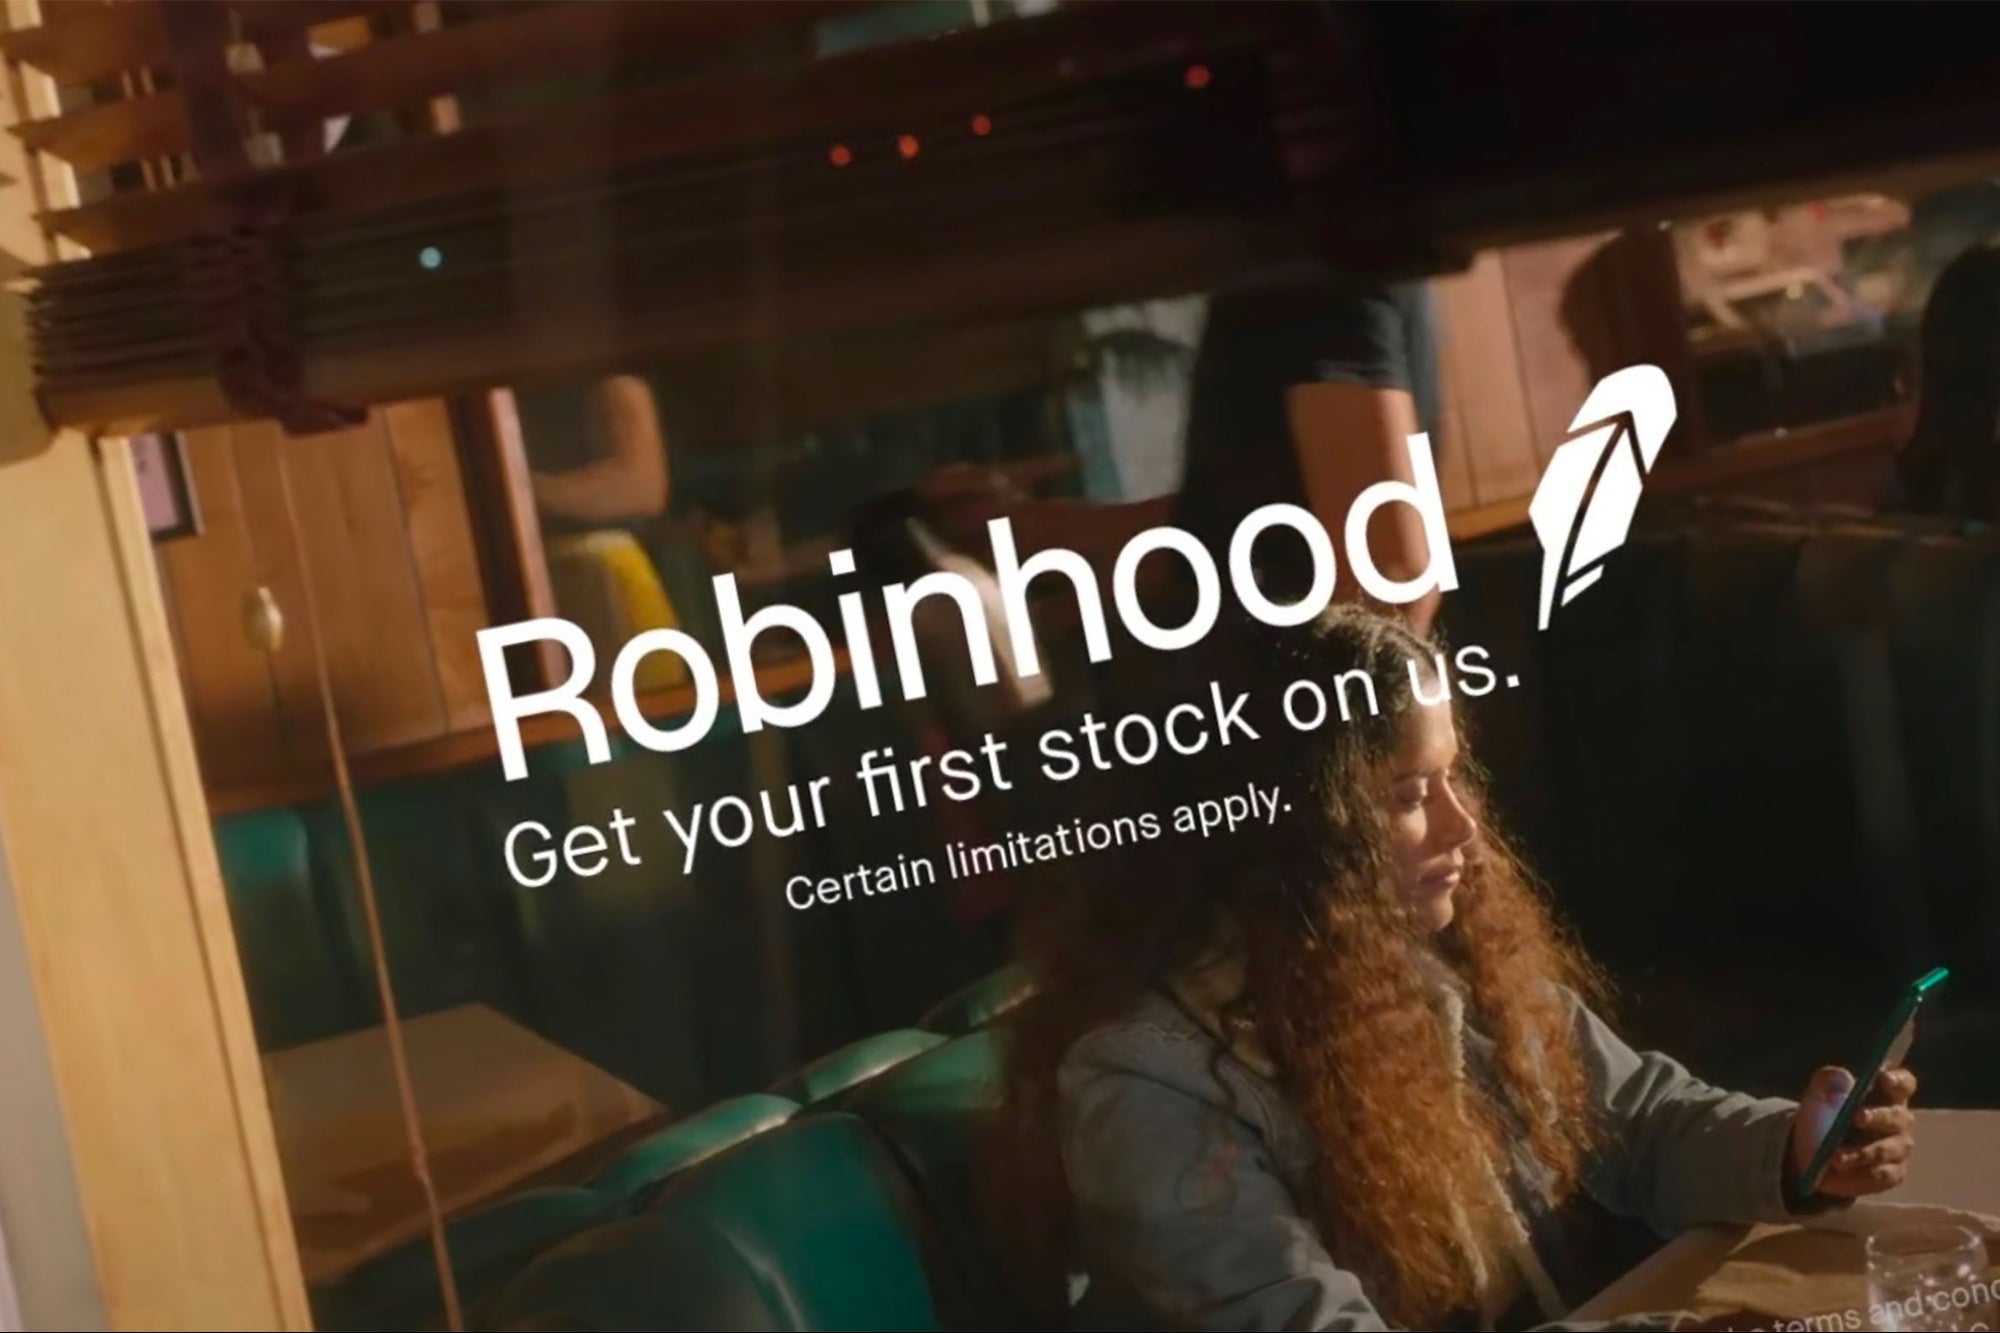 Robinhood's Super Bowl Ad Probably Won't Do Much to Win Over Critics